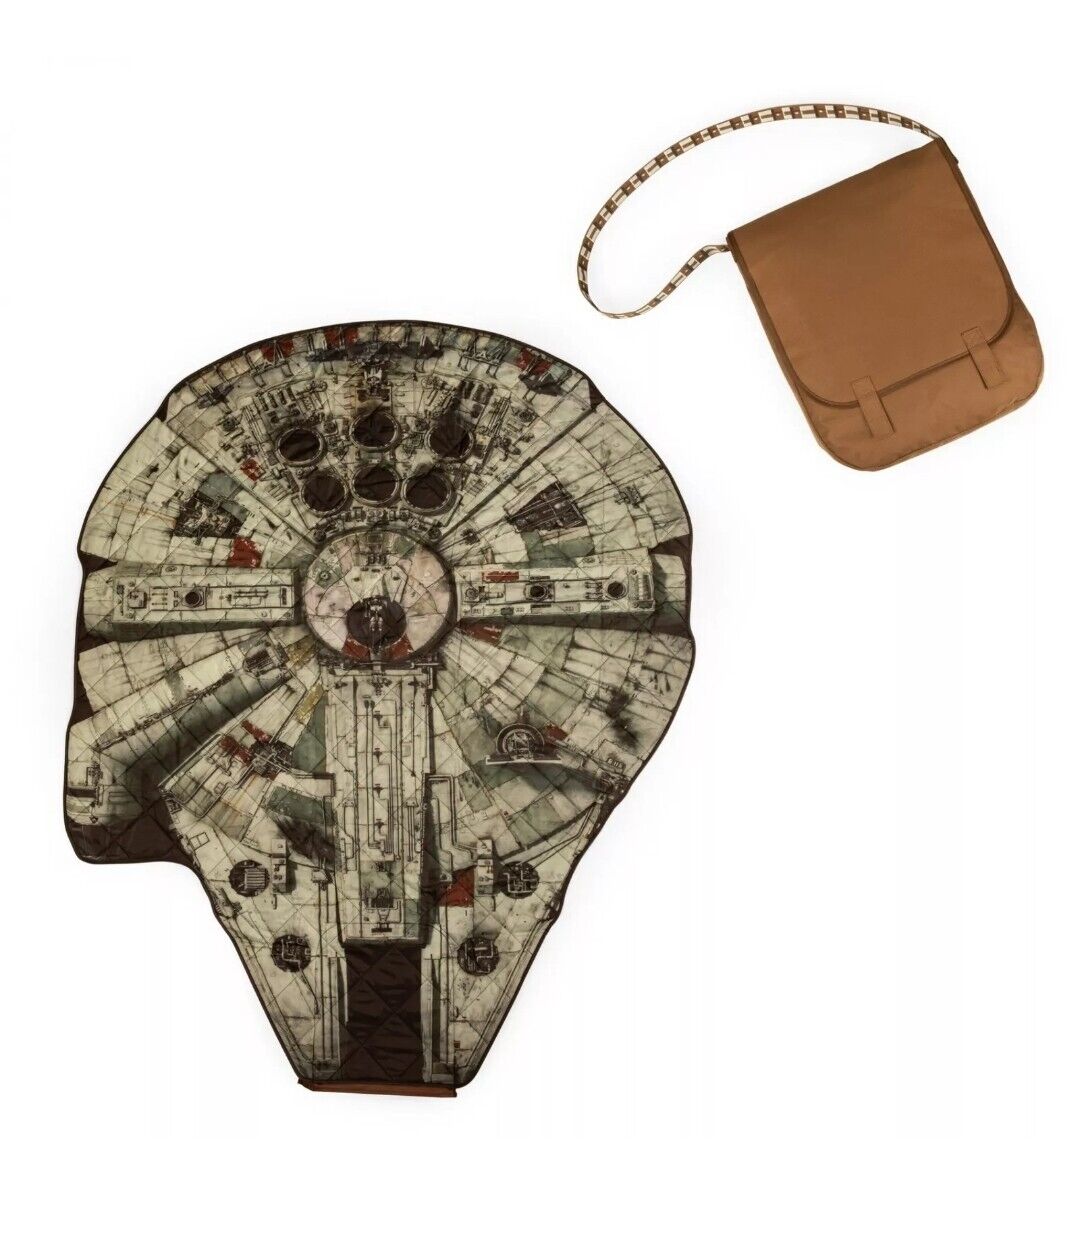 Star Wars Millennium Falcon Picnic Blanket In A Chewbacca Bag Water Resistance 